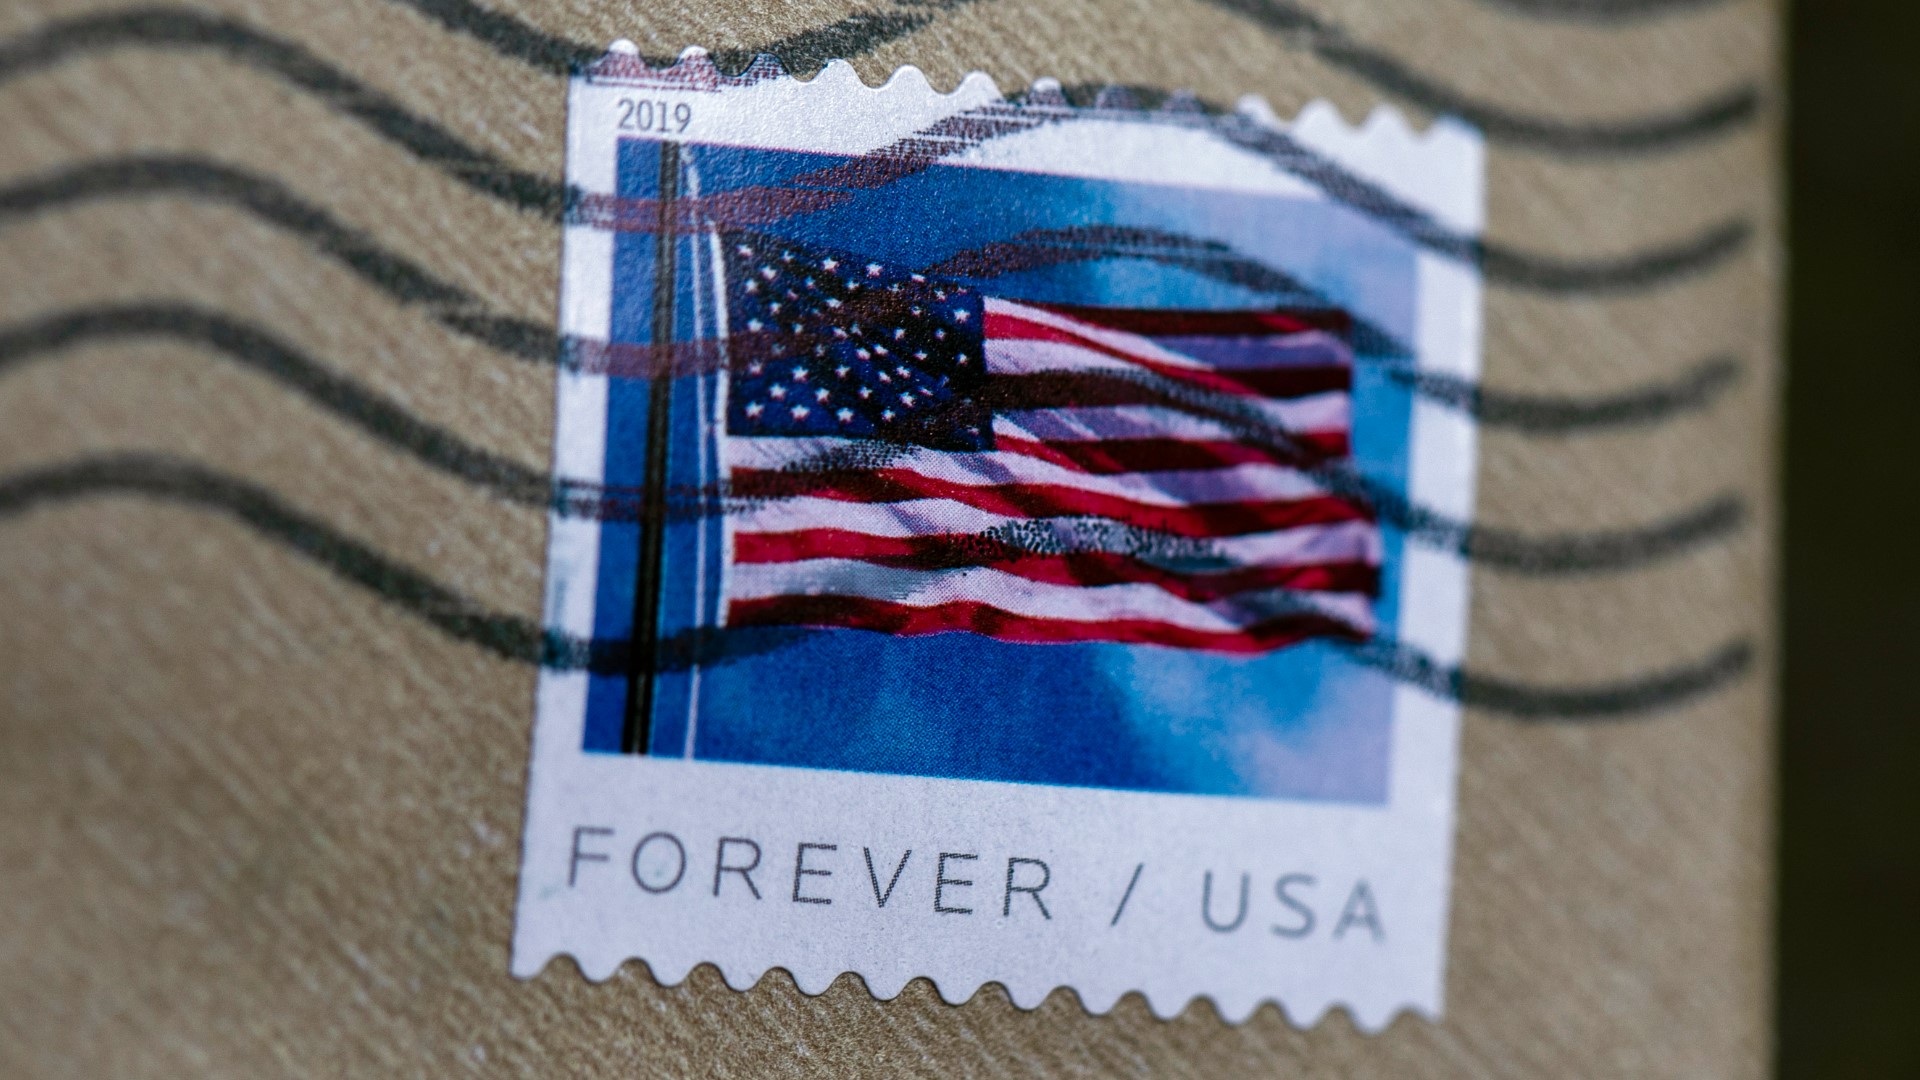 Stamp prices are increasing in January 2023